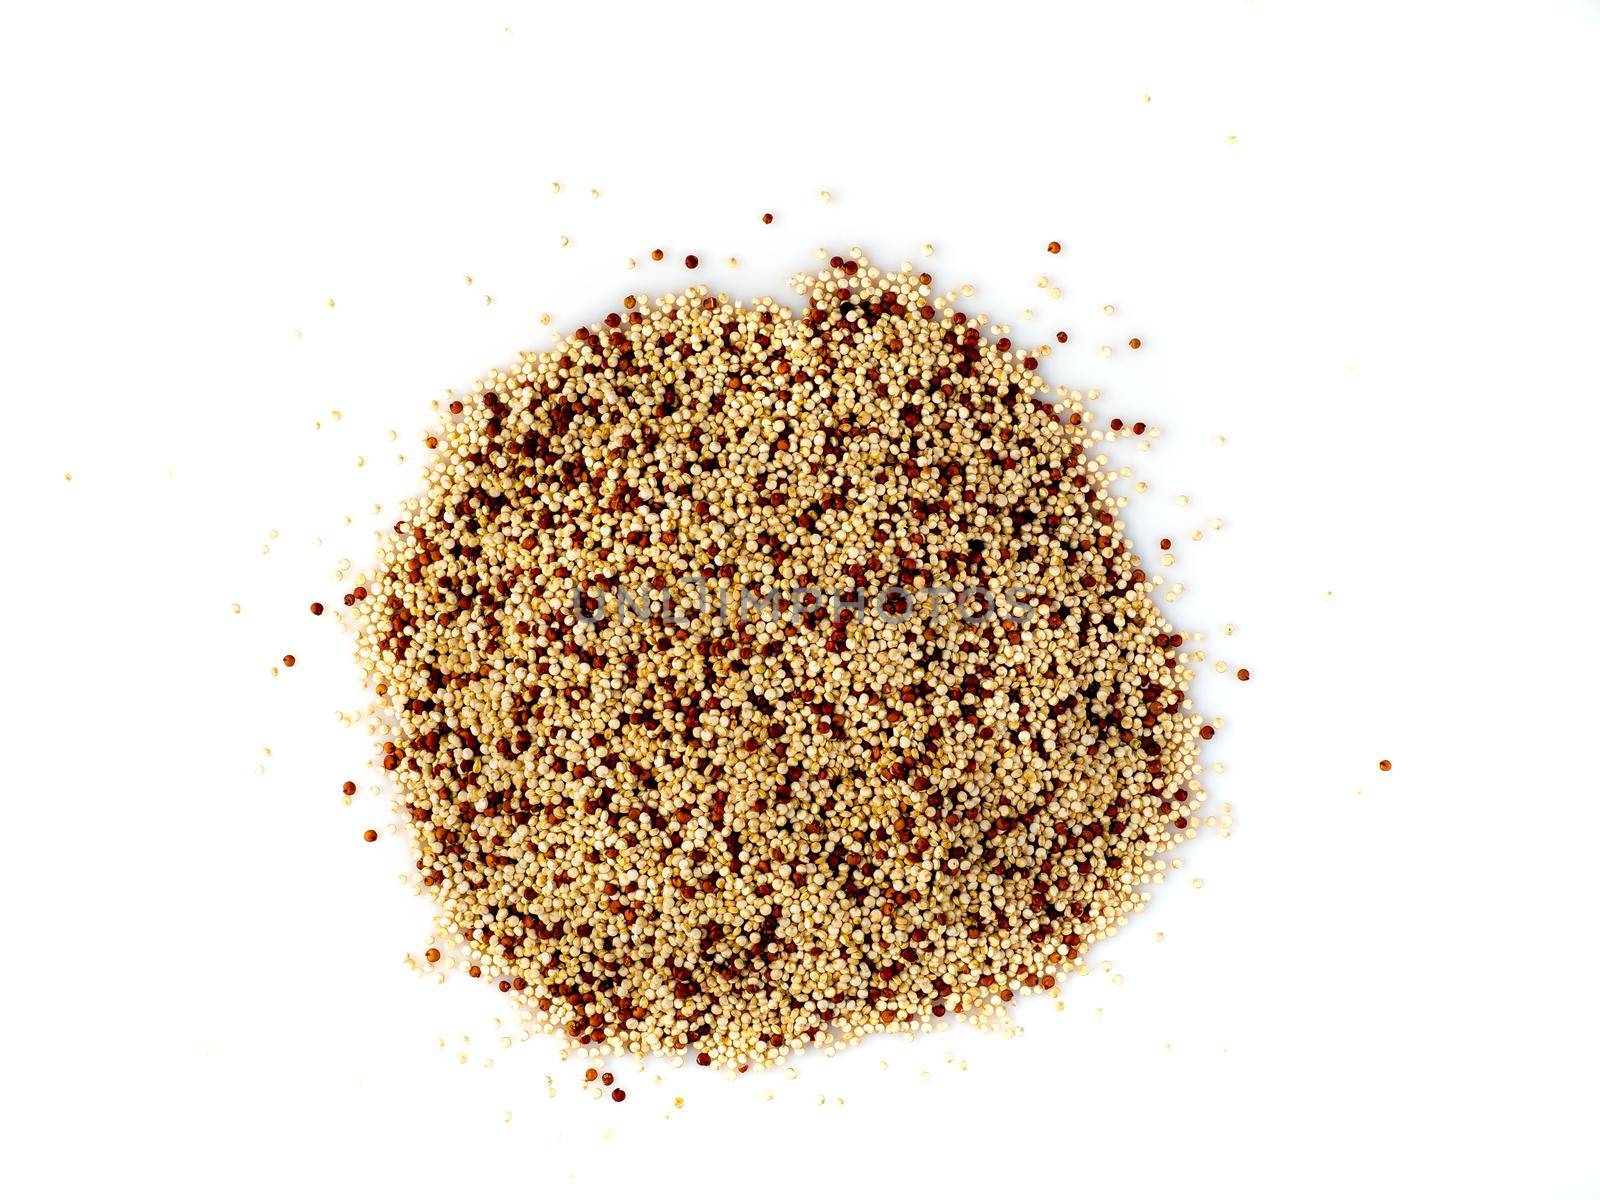 Raw quinoa seeds isolated on white background, top view, close-up